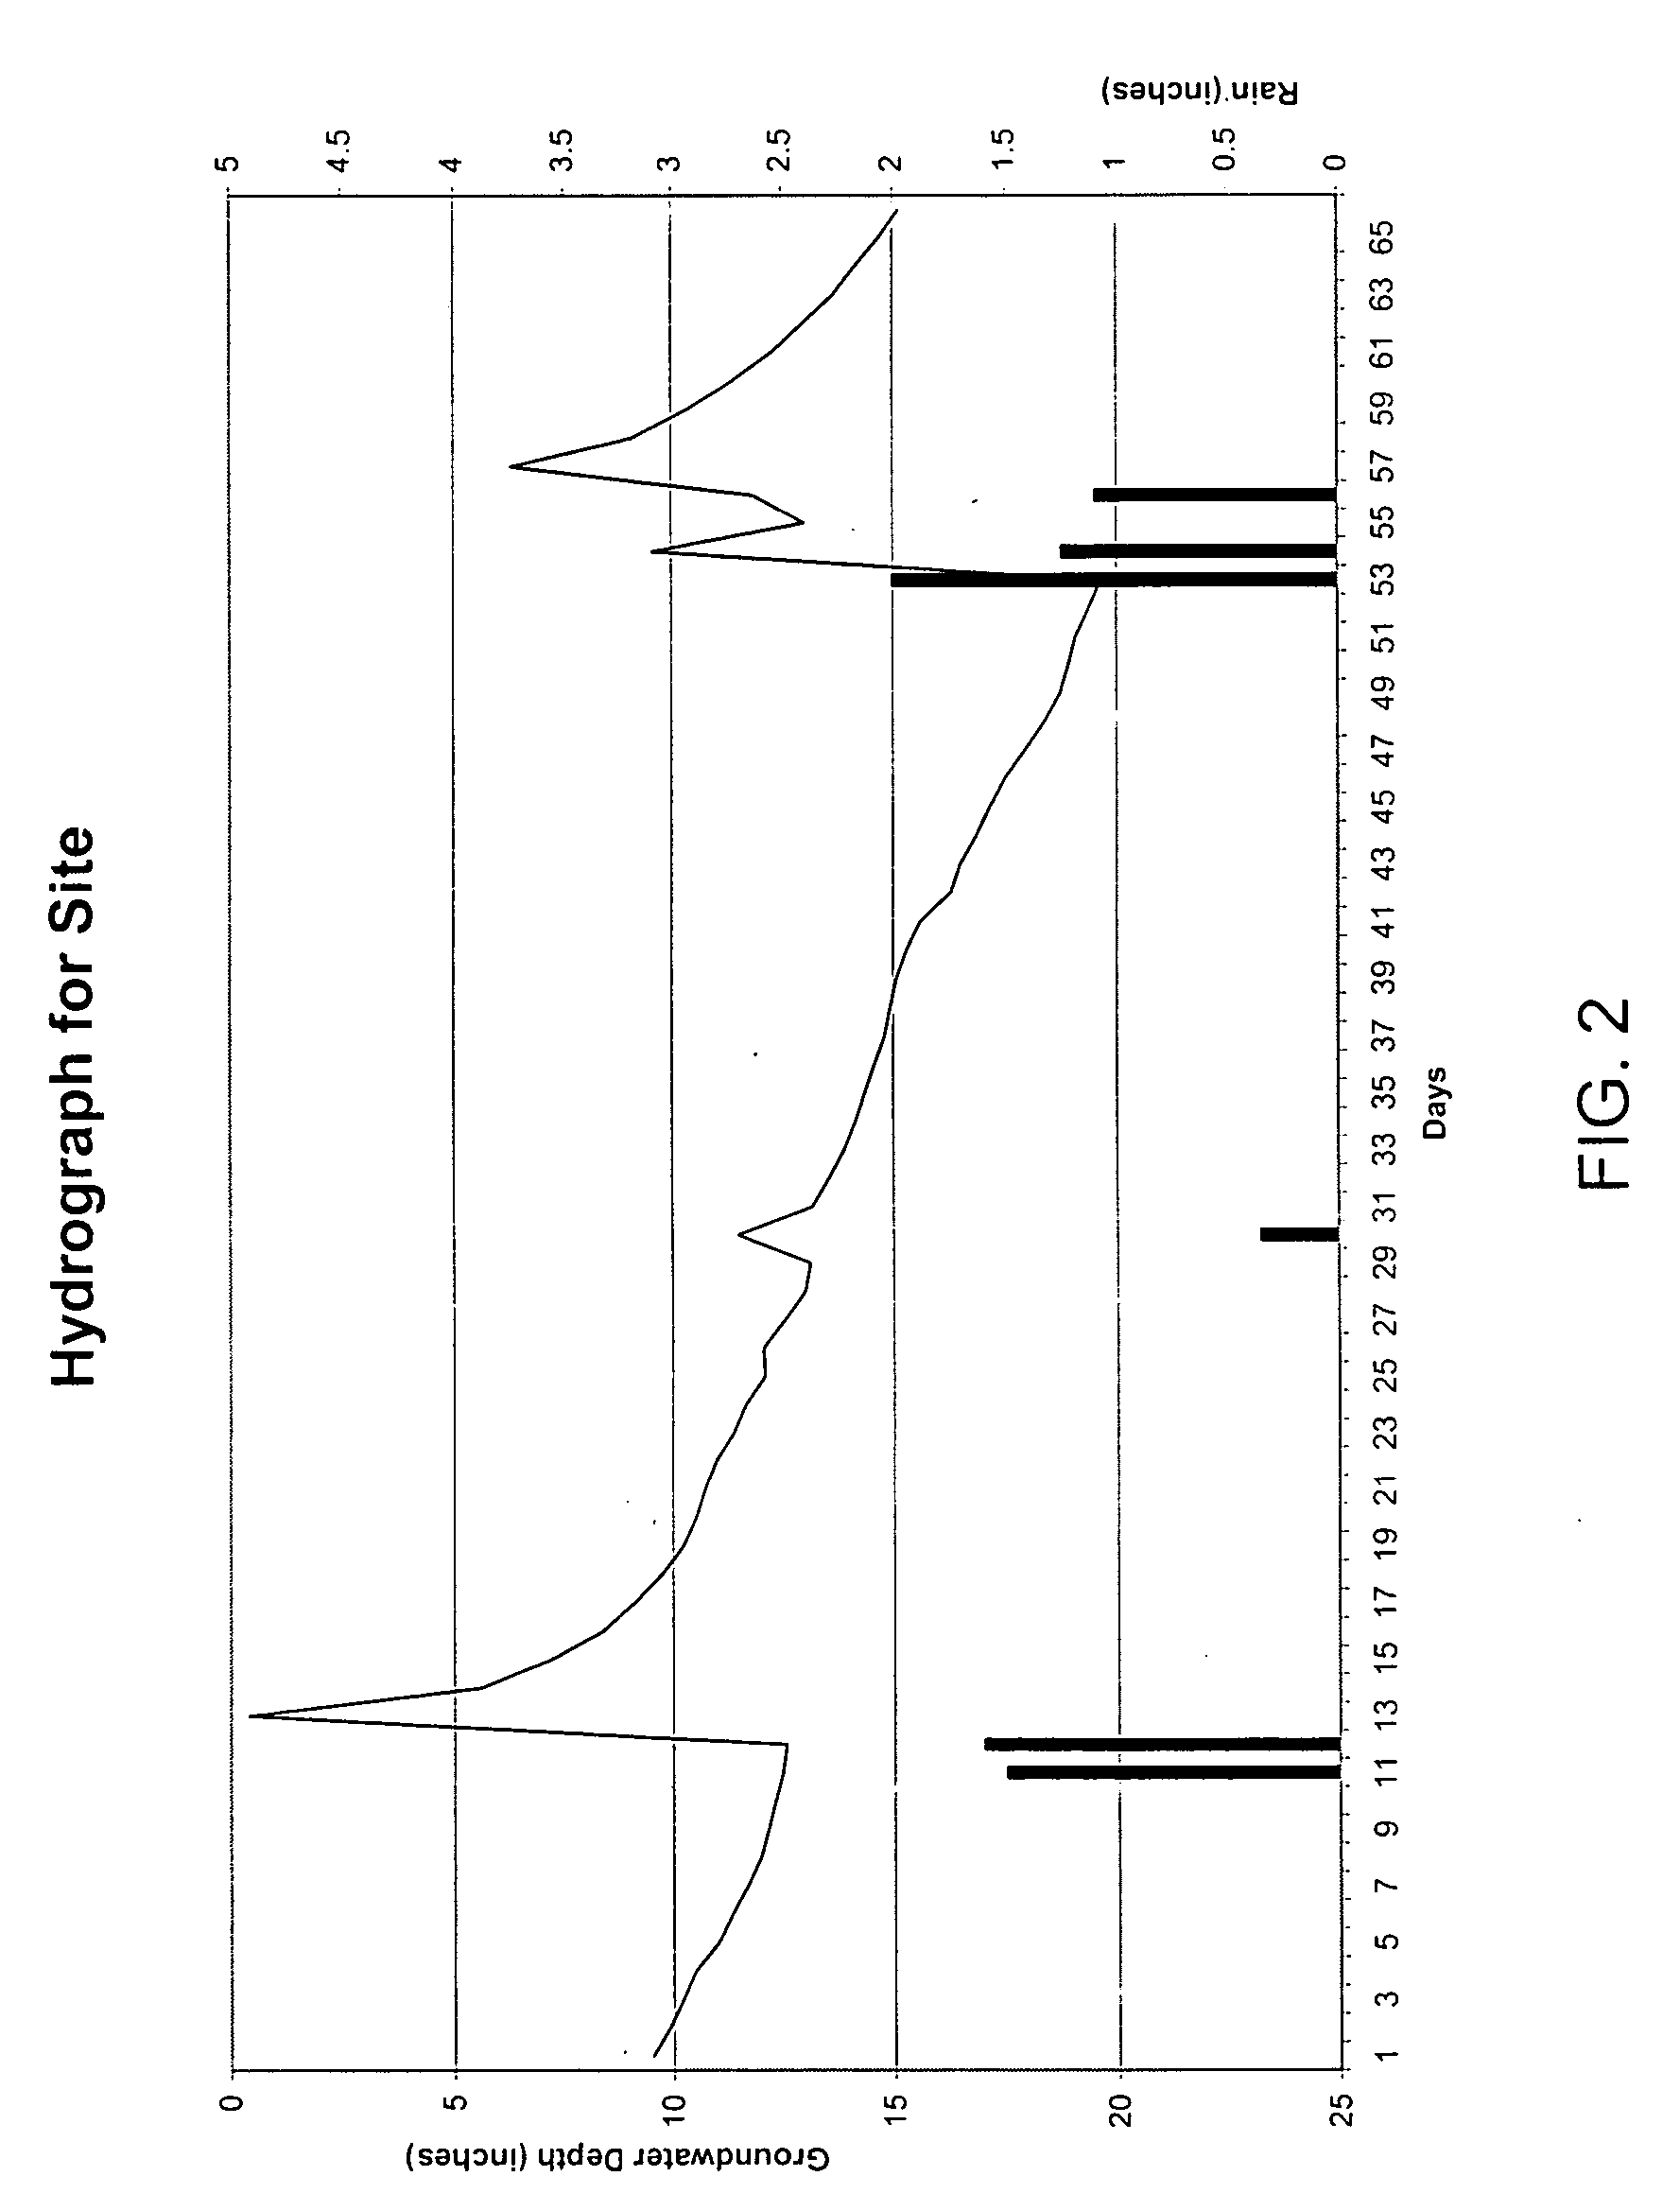 Methodology for prediction of shallow groundwater levels